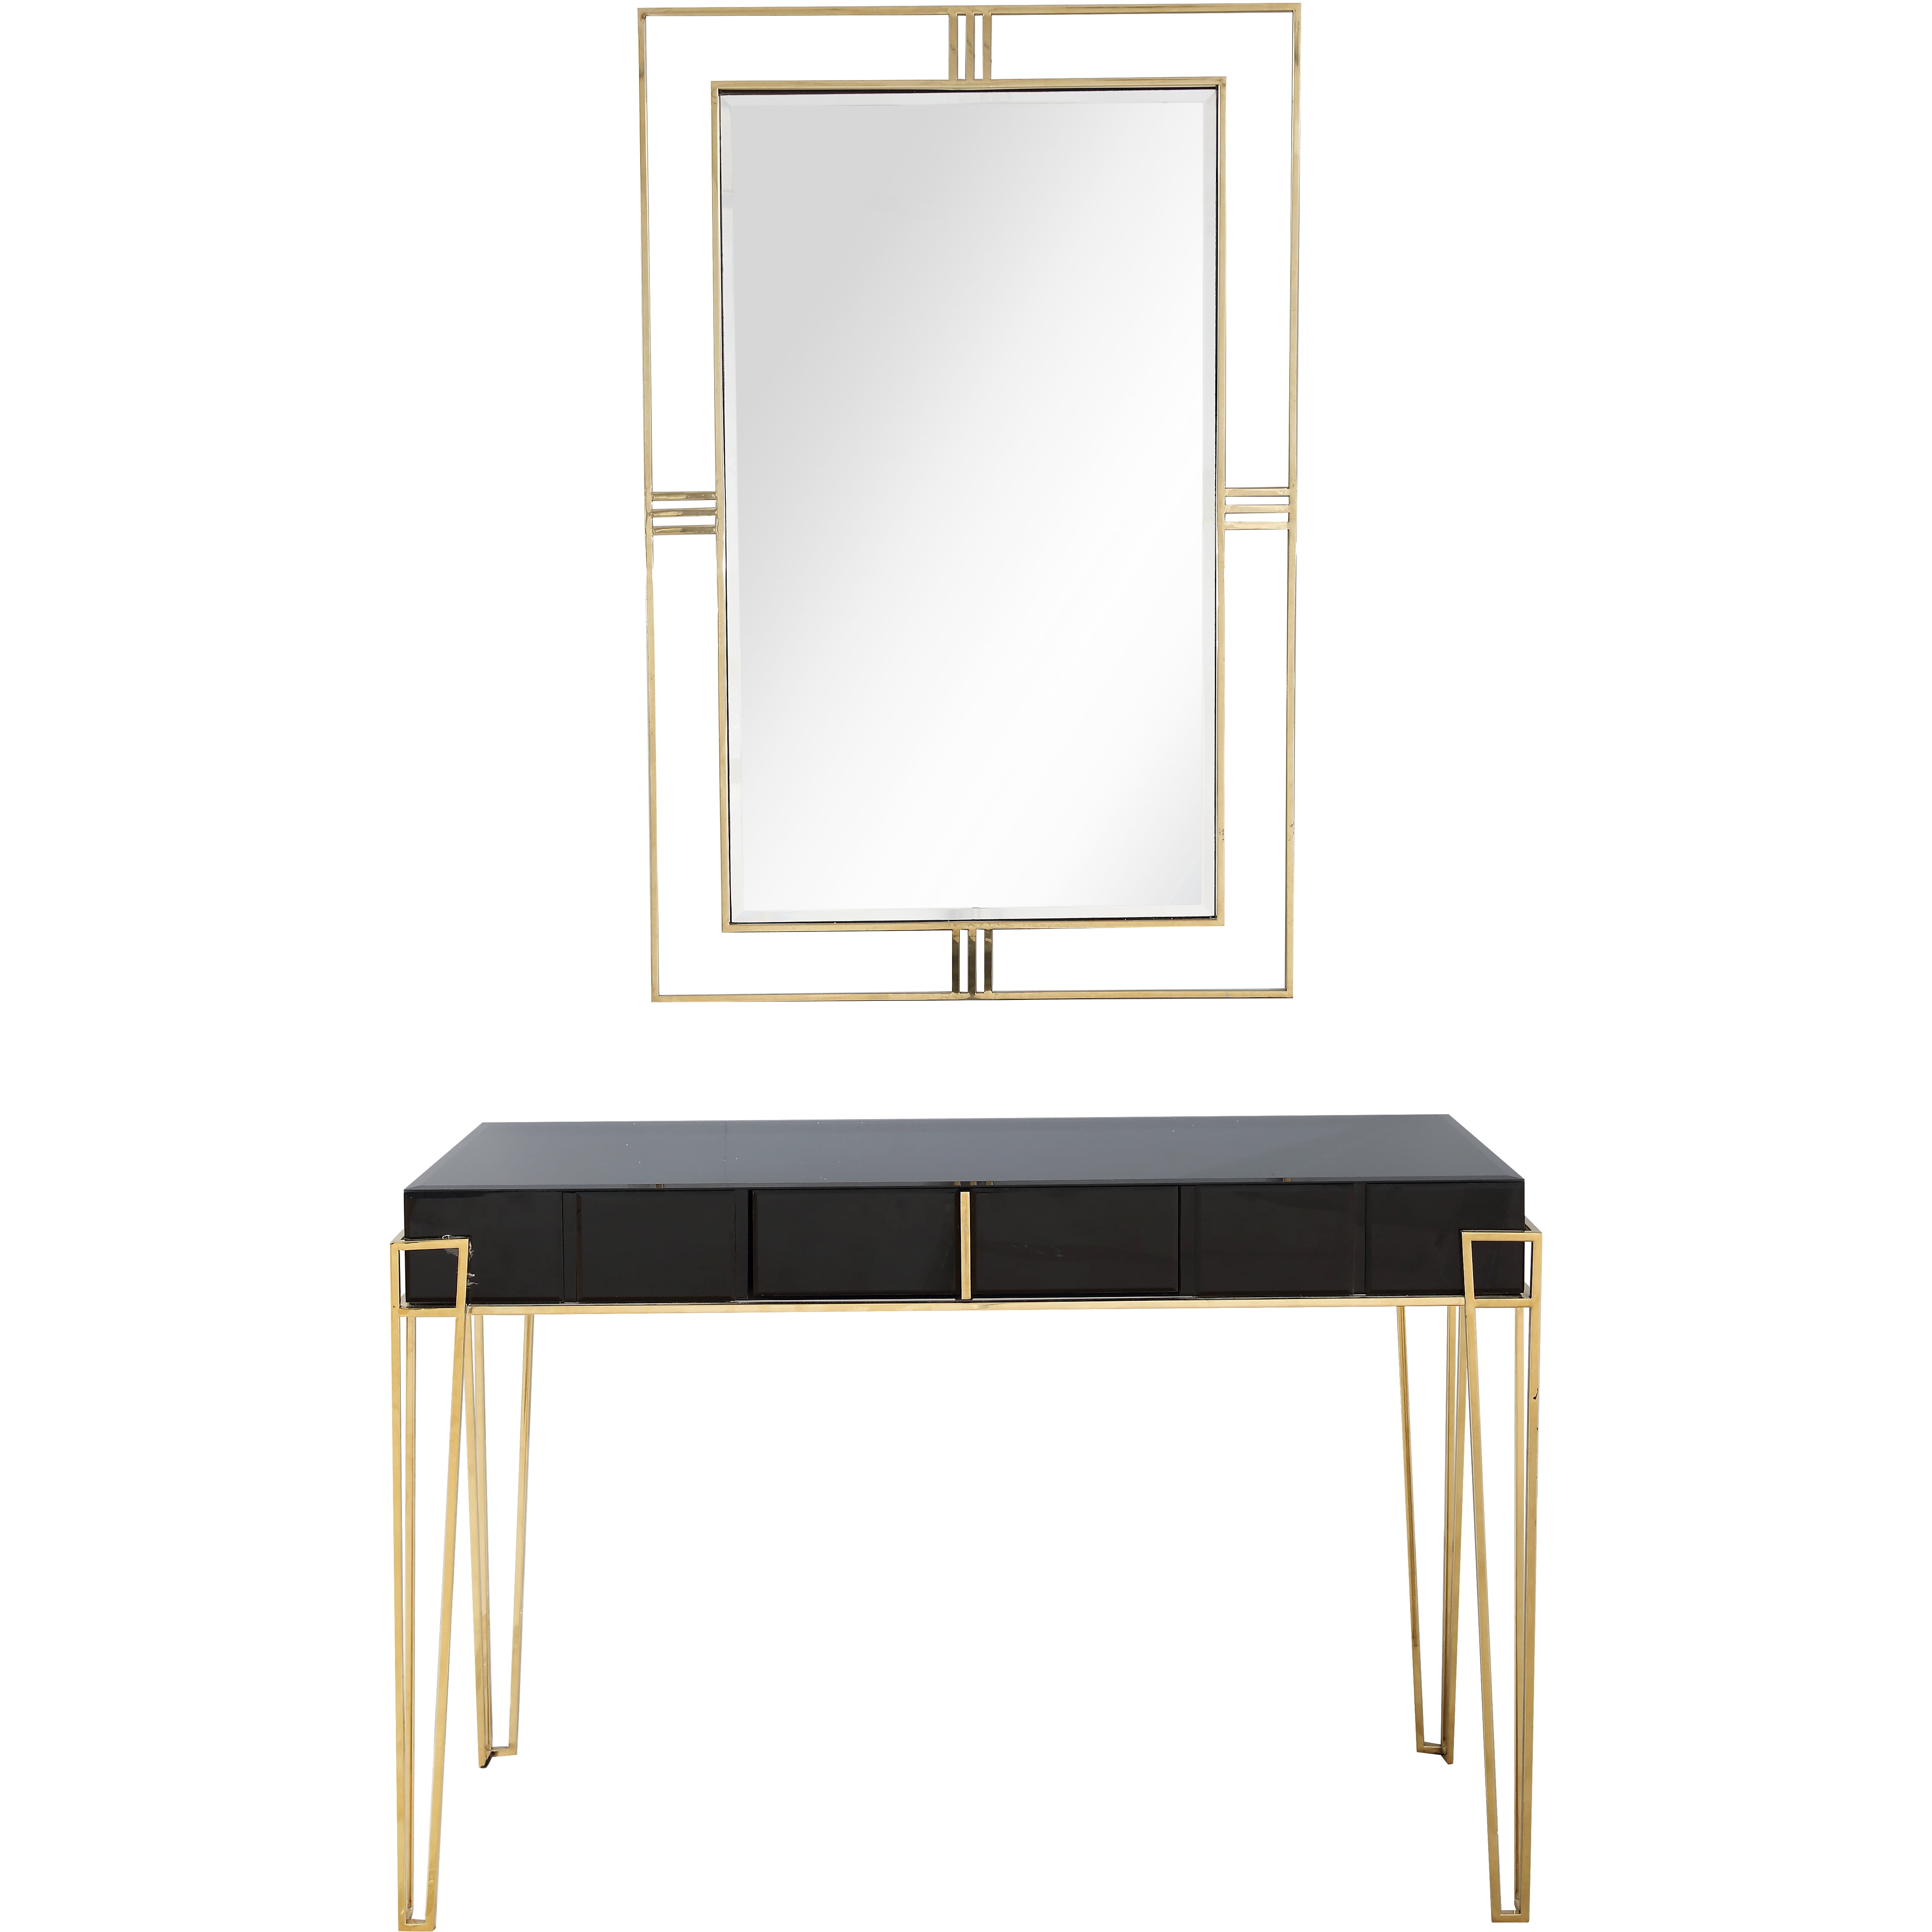 Picture of Camden Isle 86458 Daria Wall Mirror and Console Table